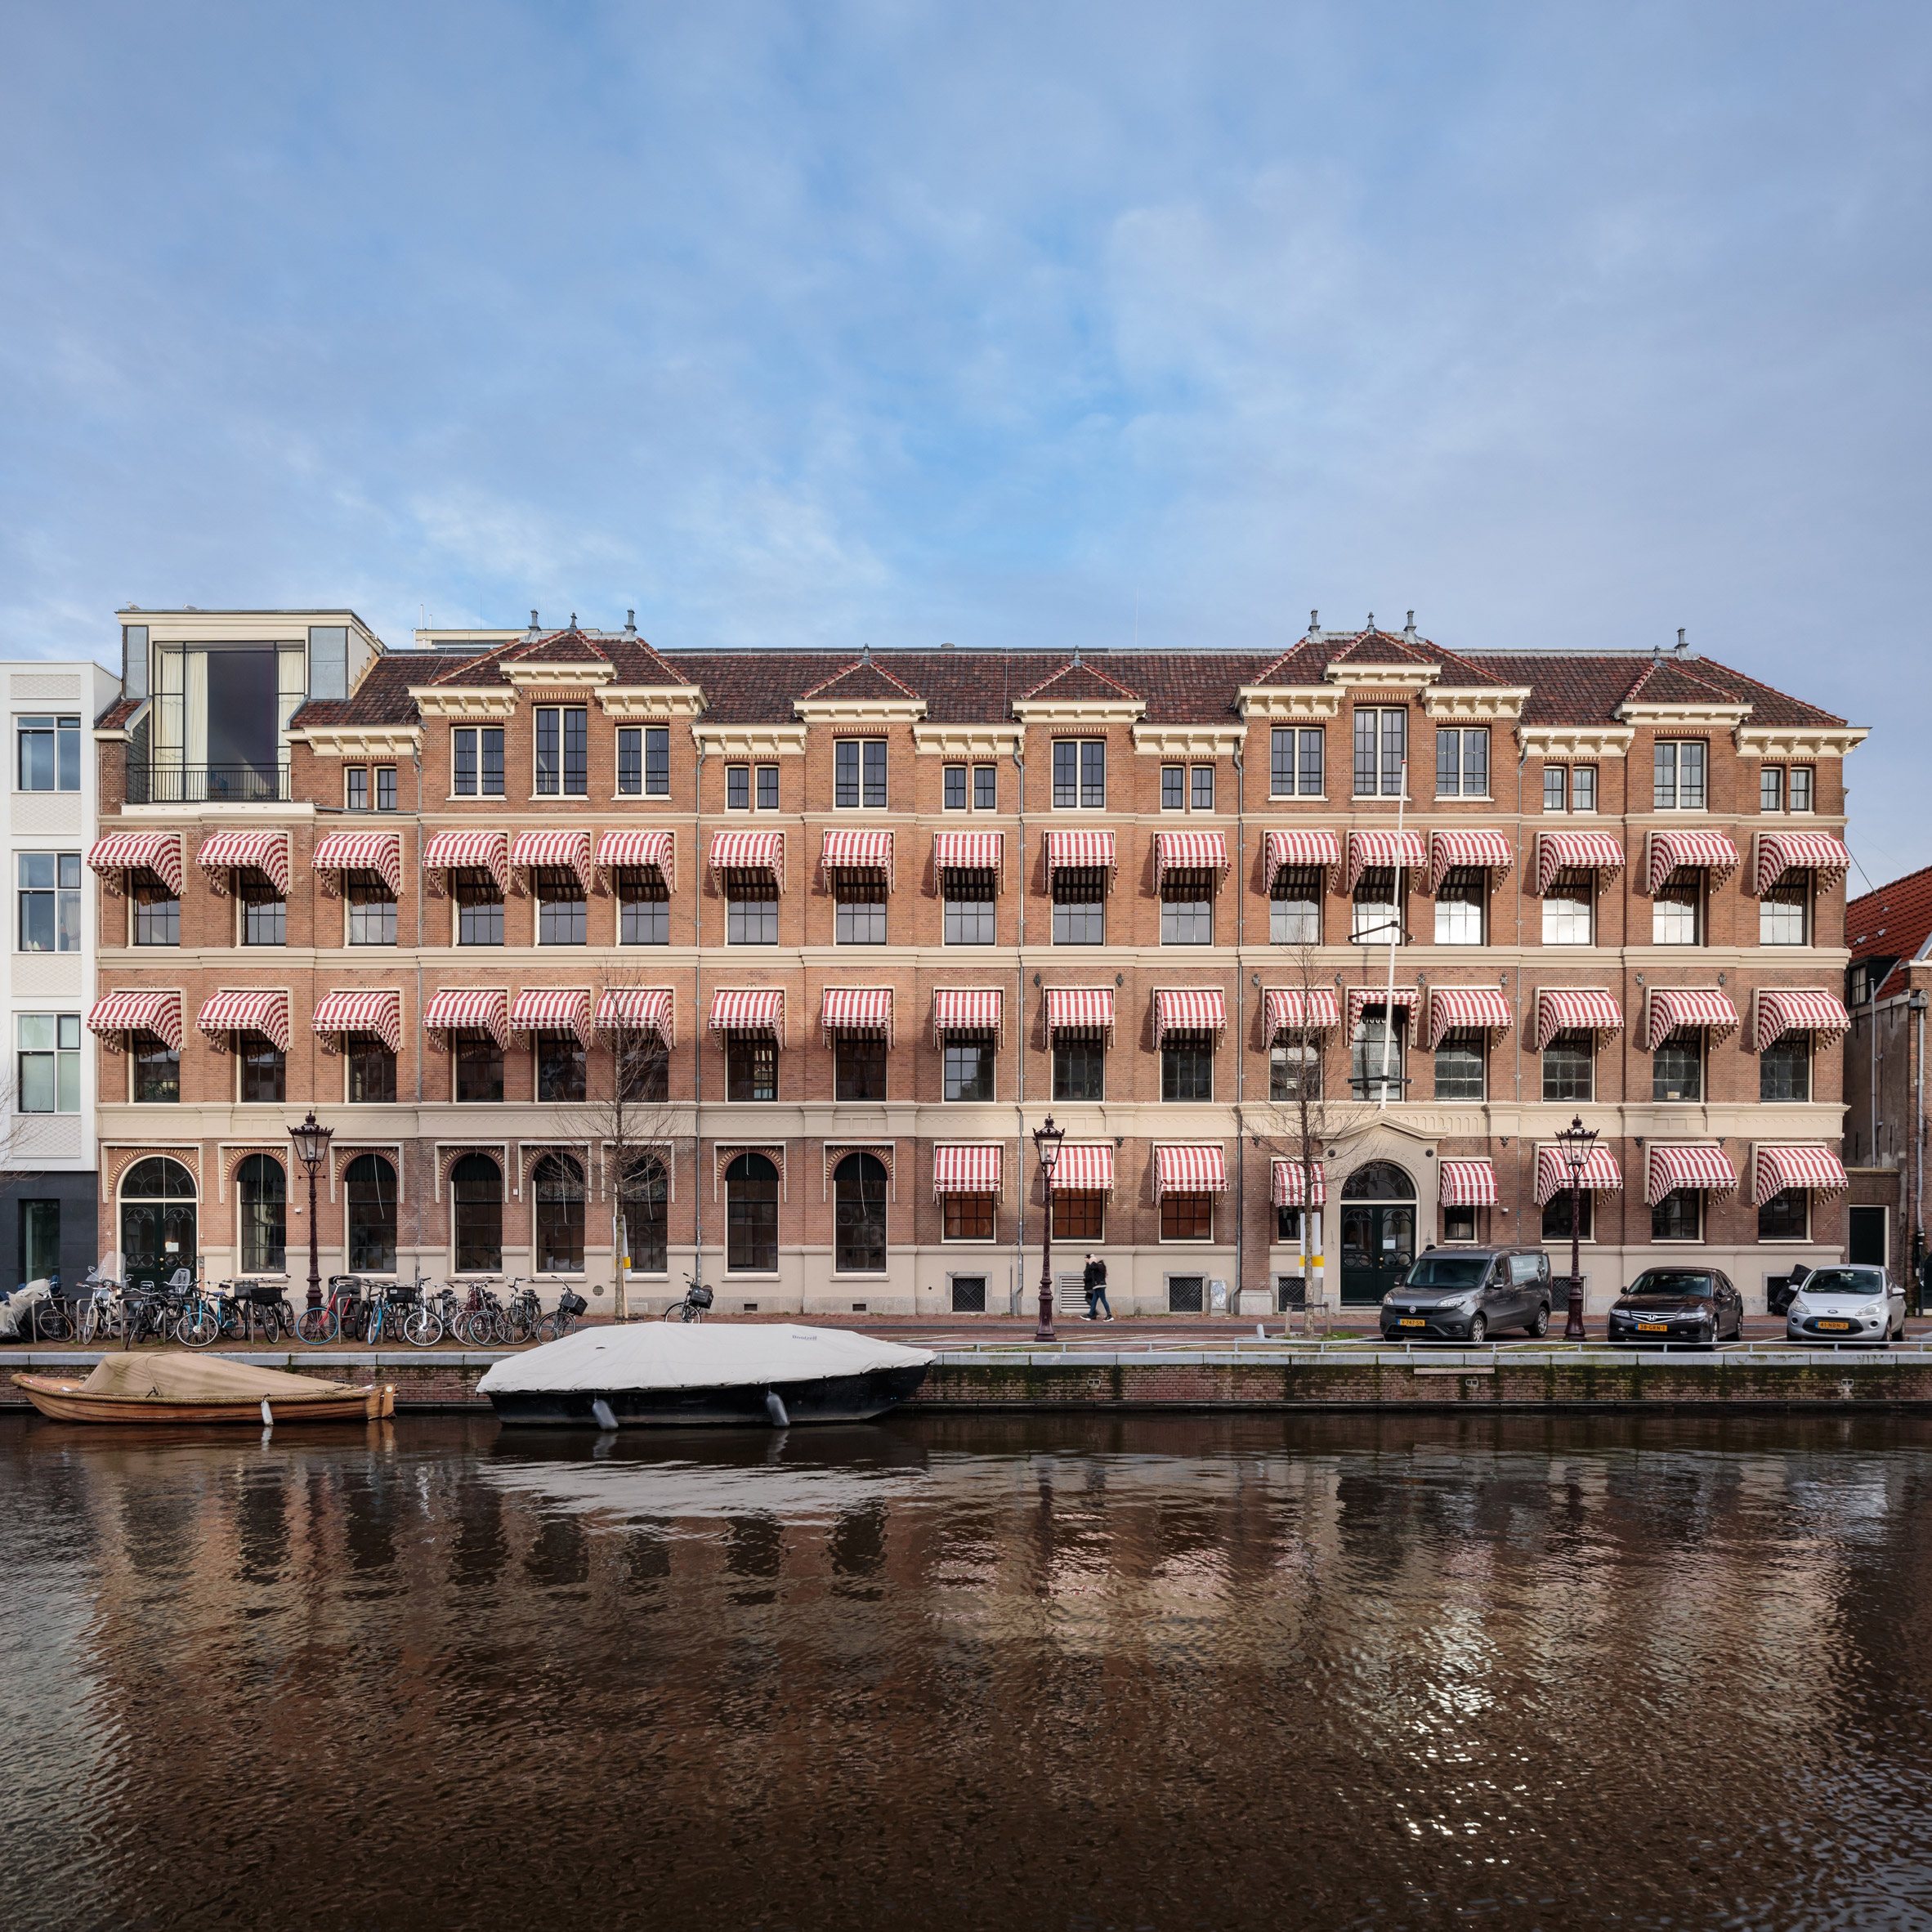 Fosbury & Sons Amsterdam, designed by Going East